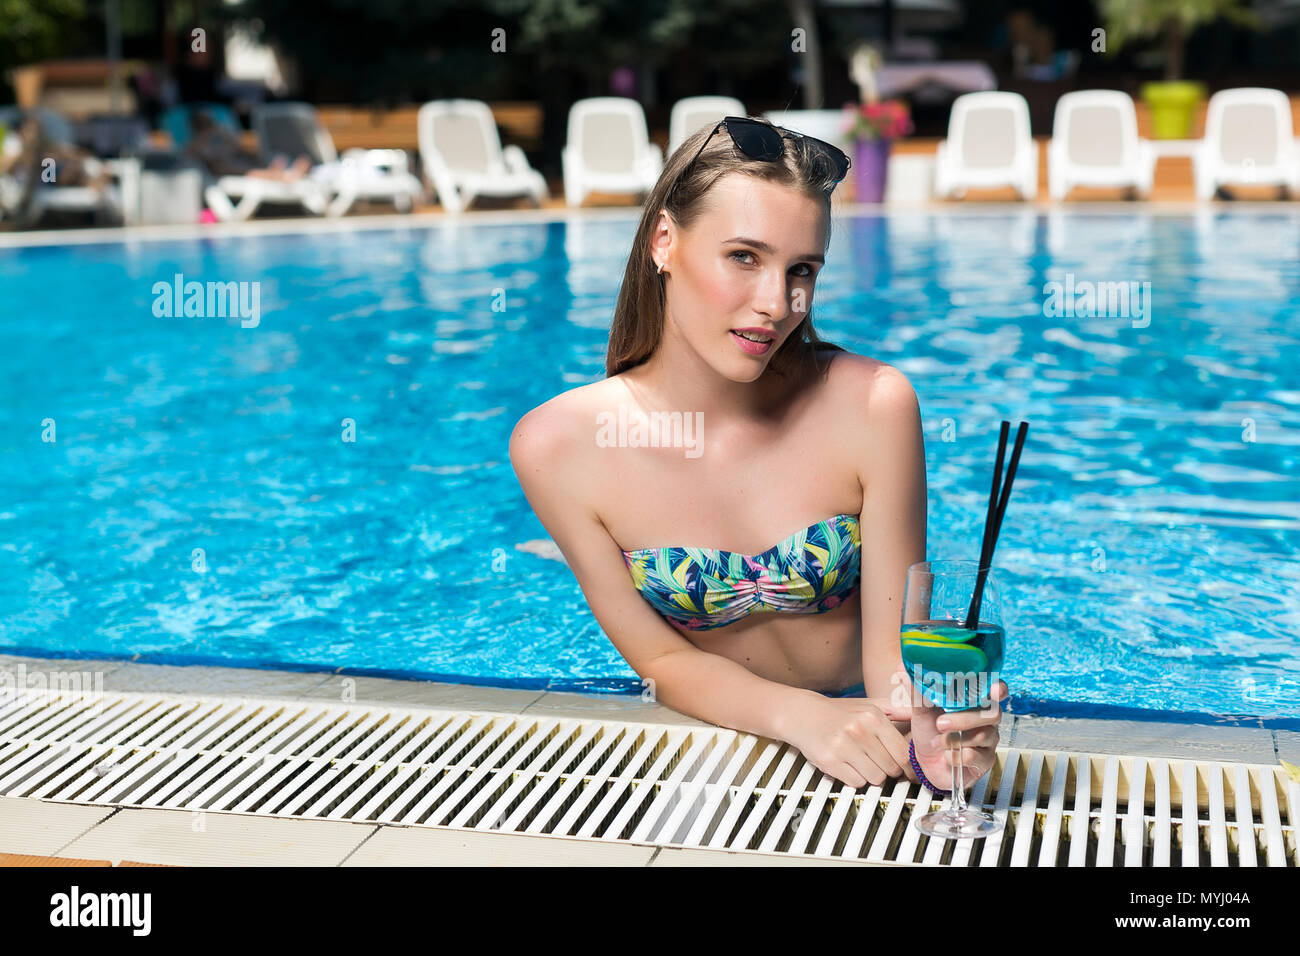 fashion, appearance, enchantment concept. by the edge of pool there is girl who is half dip in the clean water, she is swimming and having fun, drinking cocktails Stock Photo